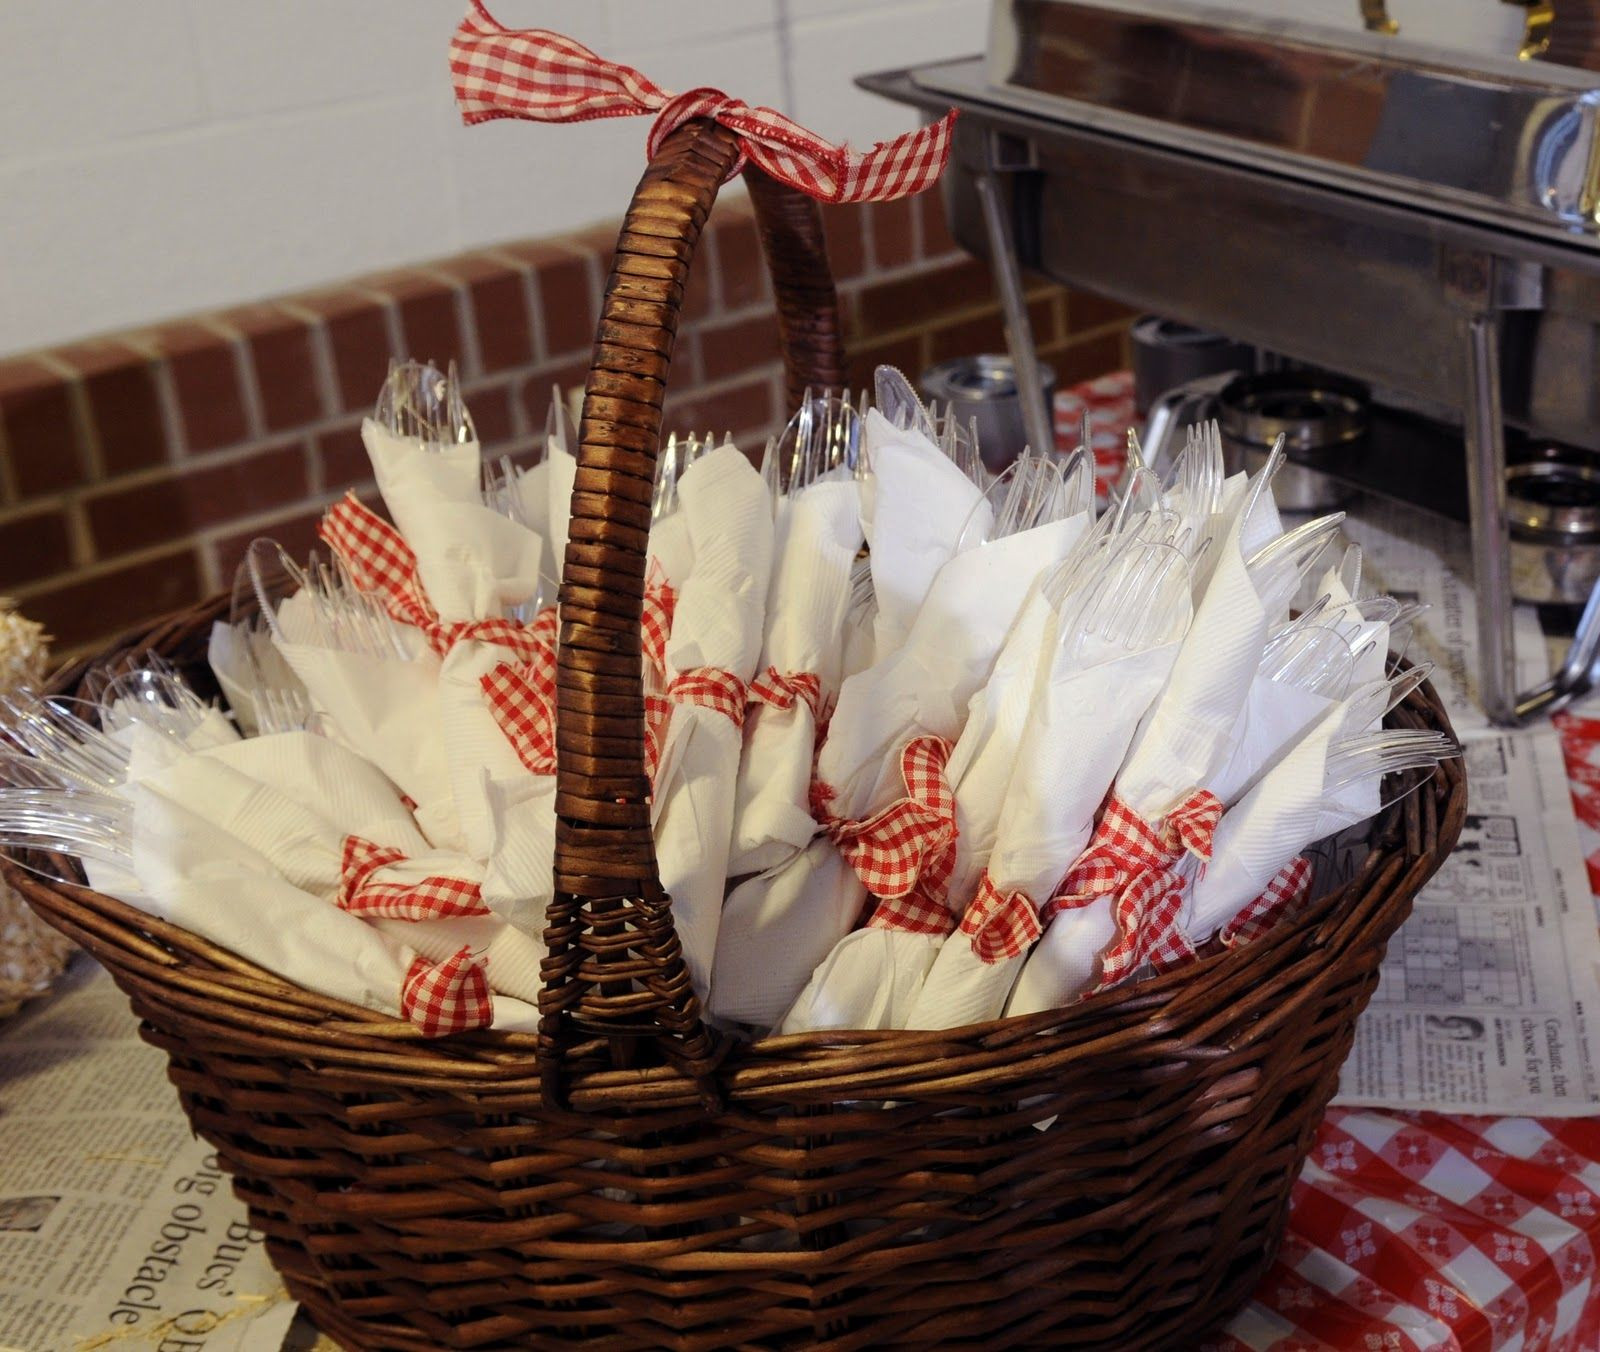 Bbq Graduation Party Ideas
 Napkins tied with red and white gingham ribbon for BBQ or